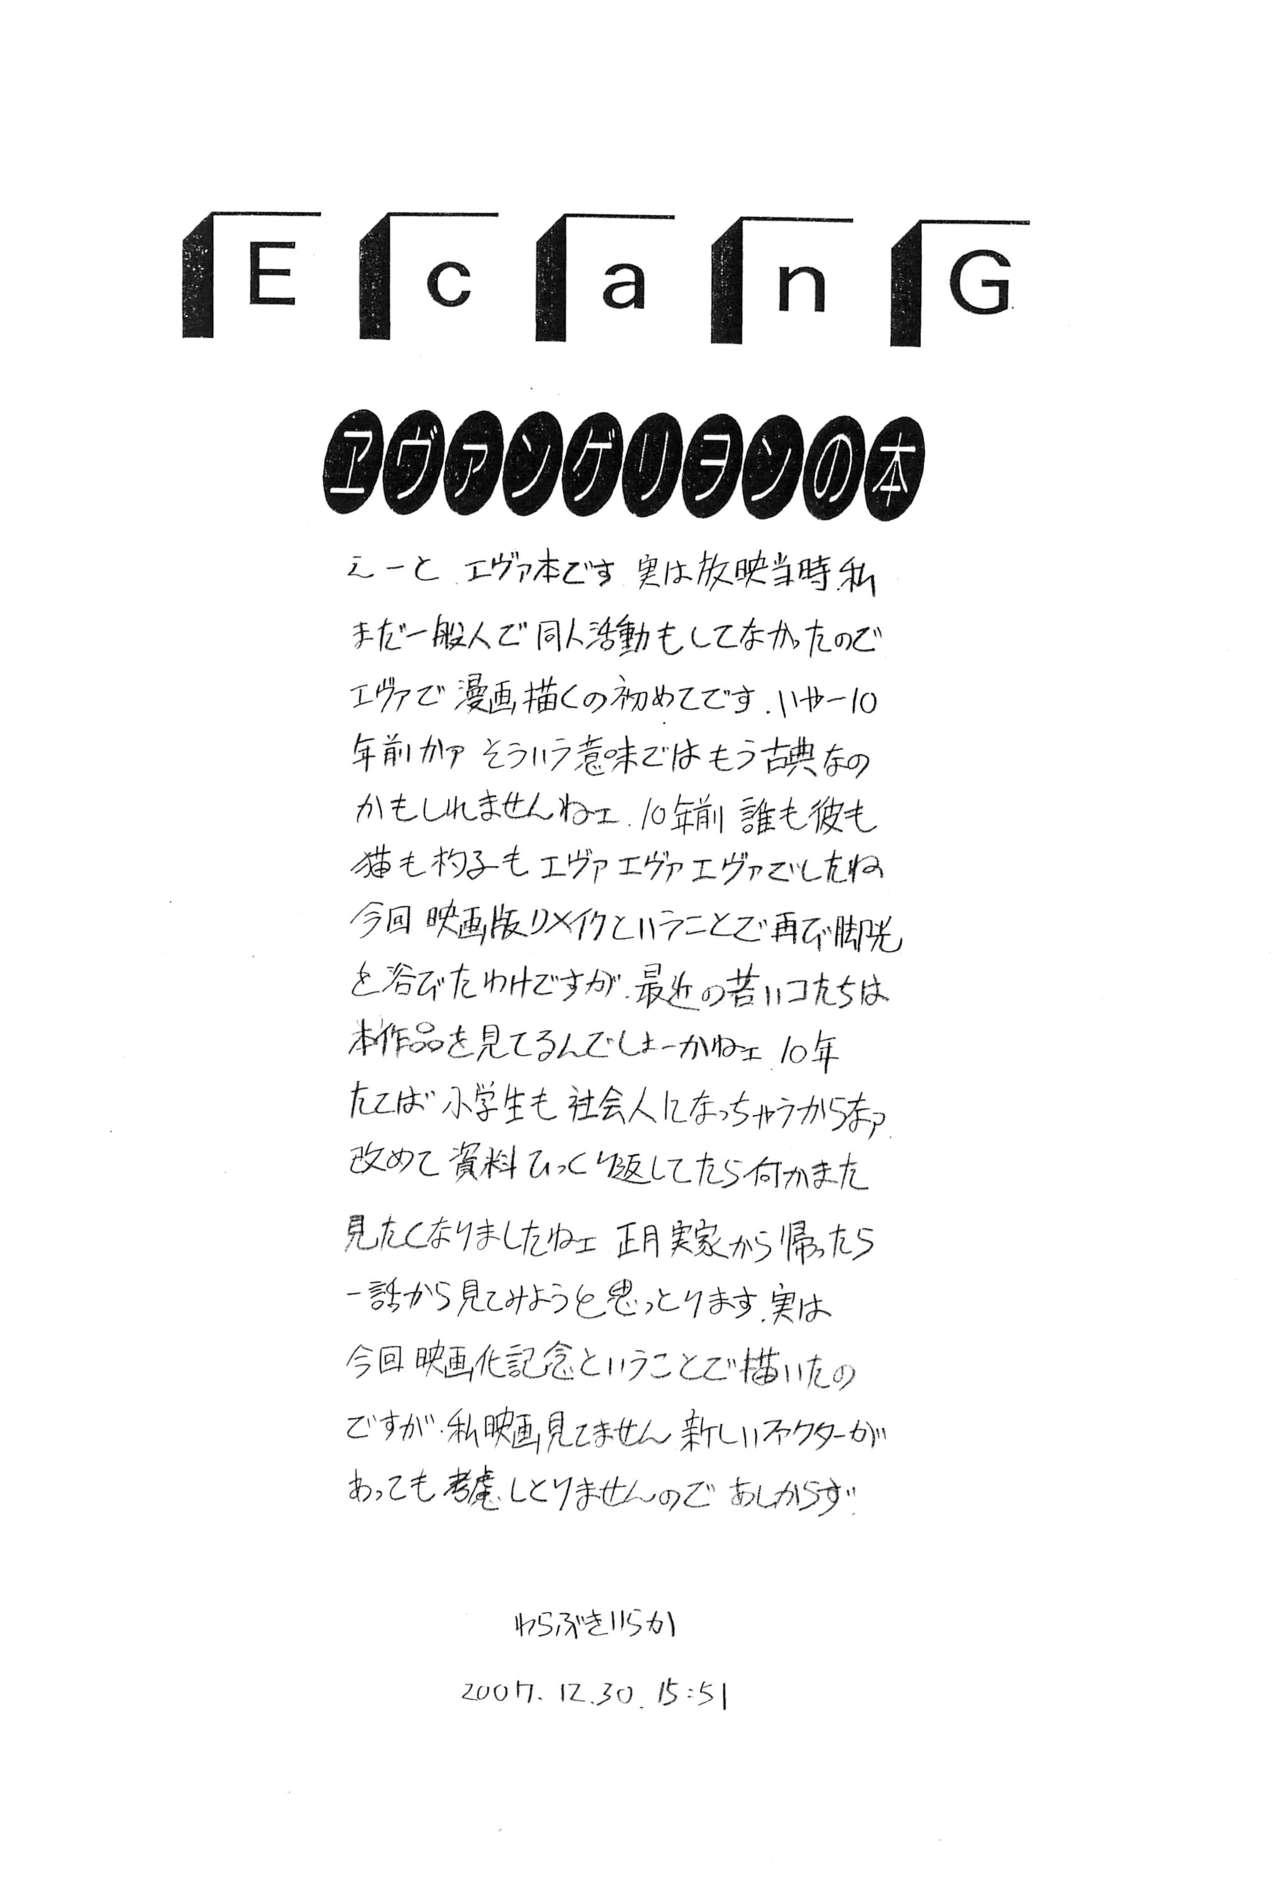 Anime E can G vol.20 - Neon genesis evangelion Culo - Page 2